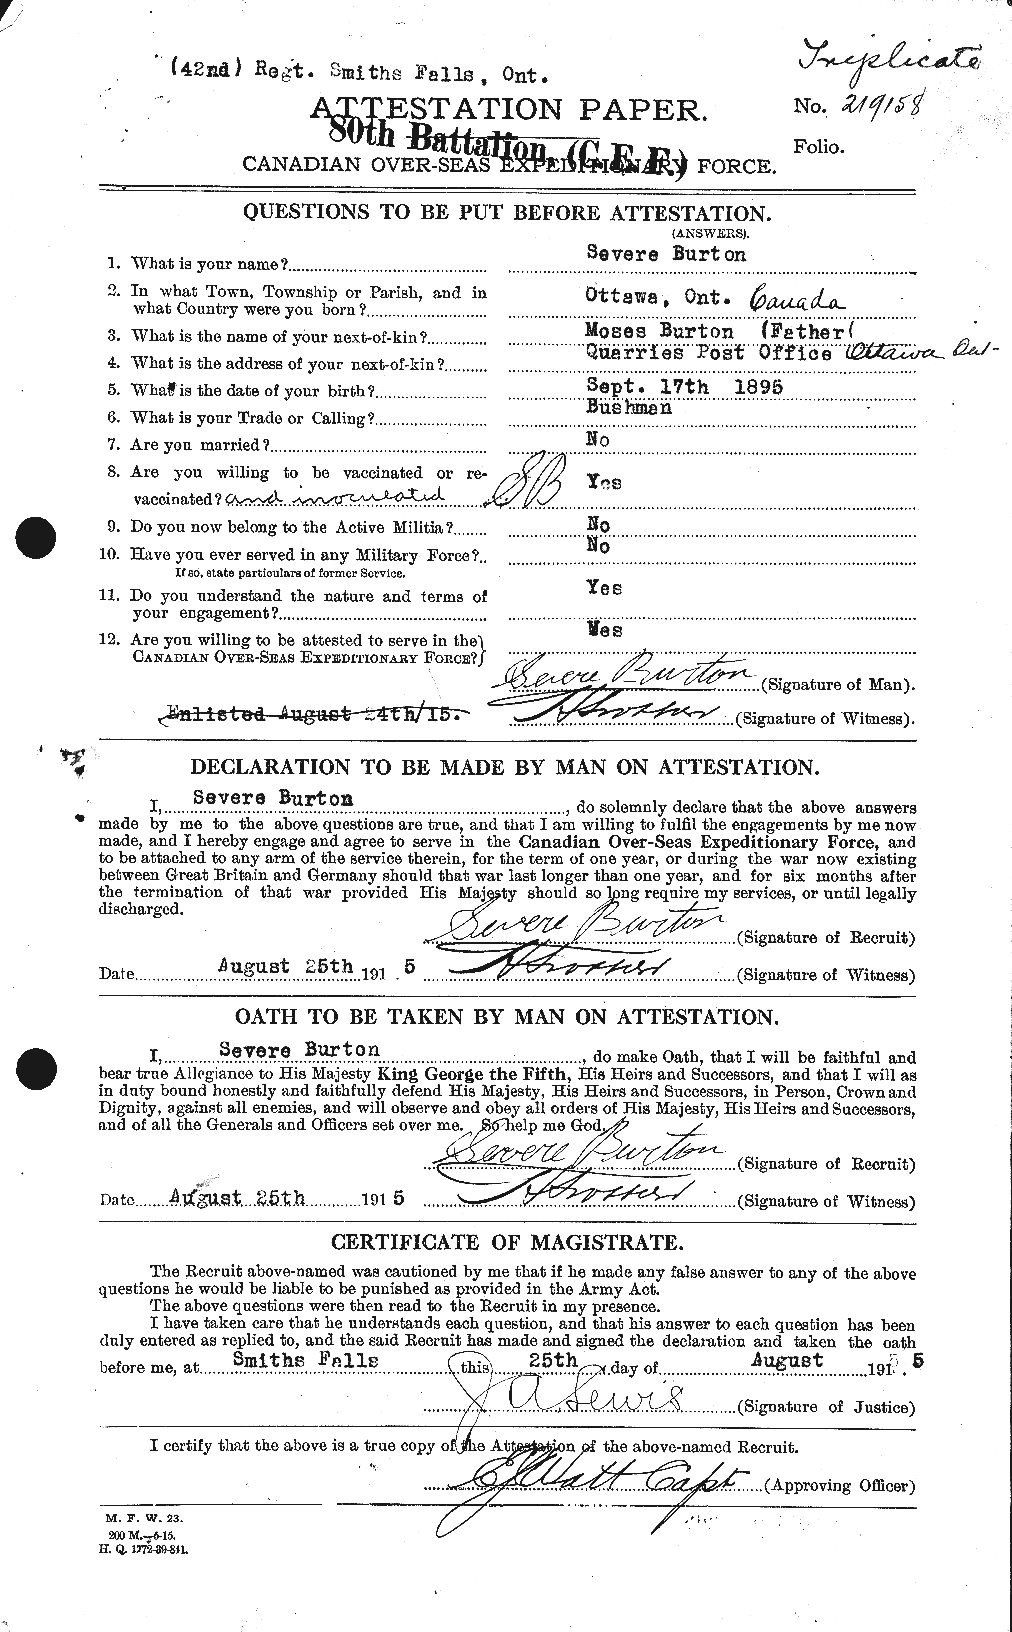 Personnel Records of the First World War - CEF 272713a